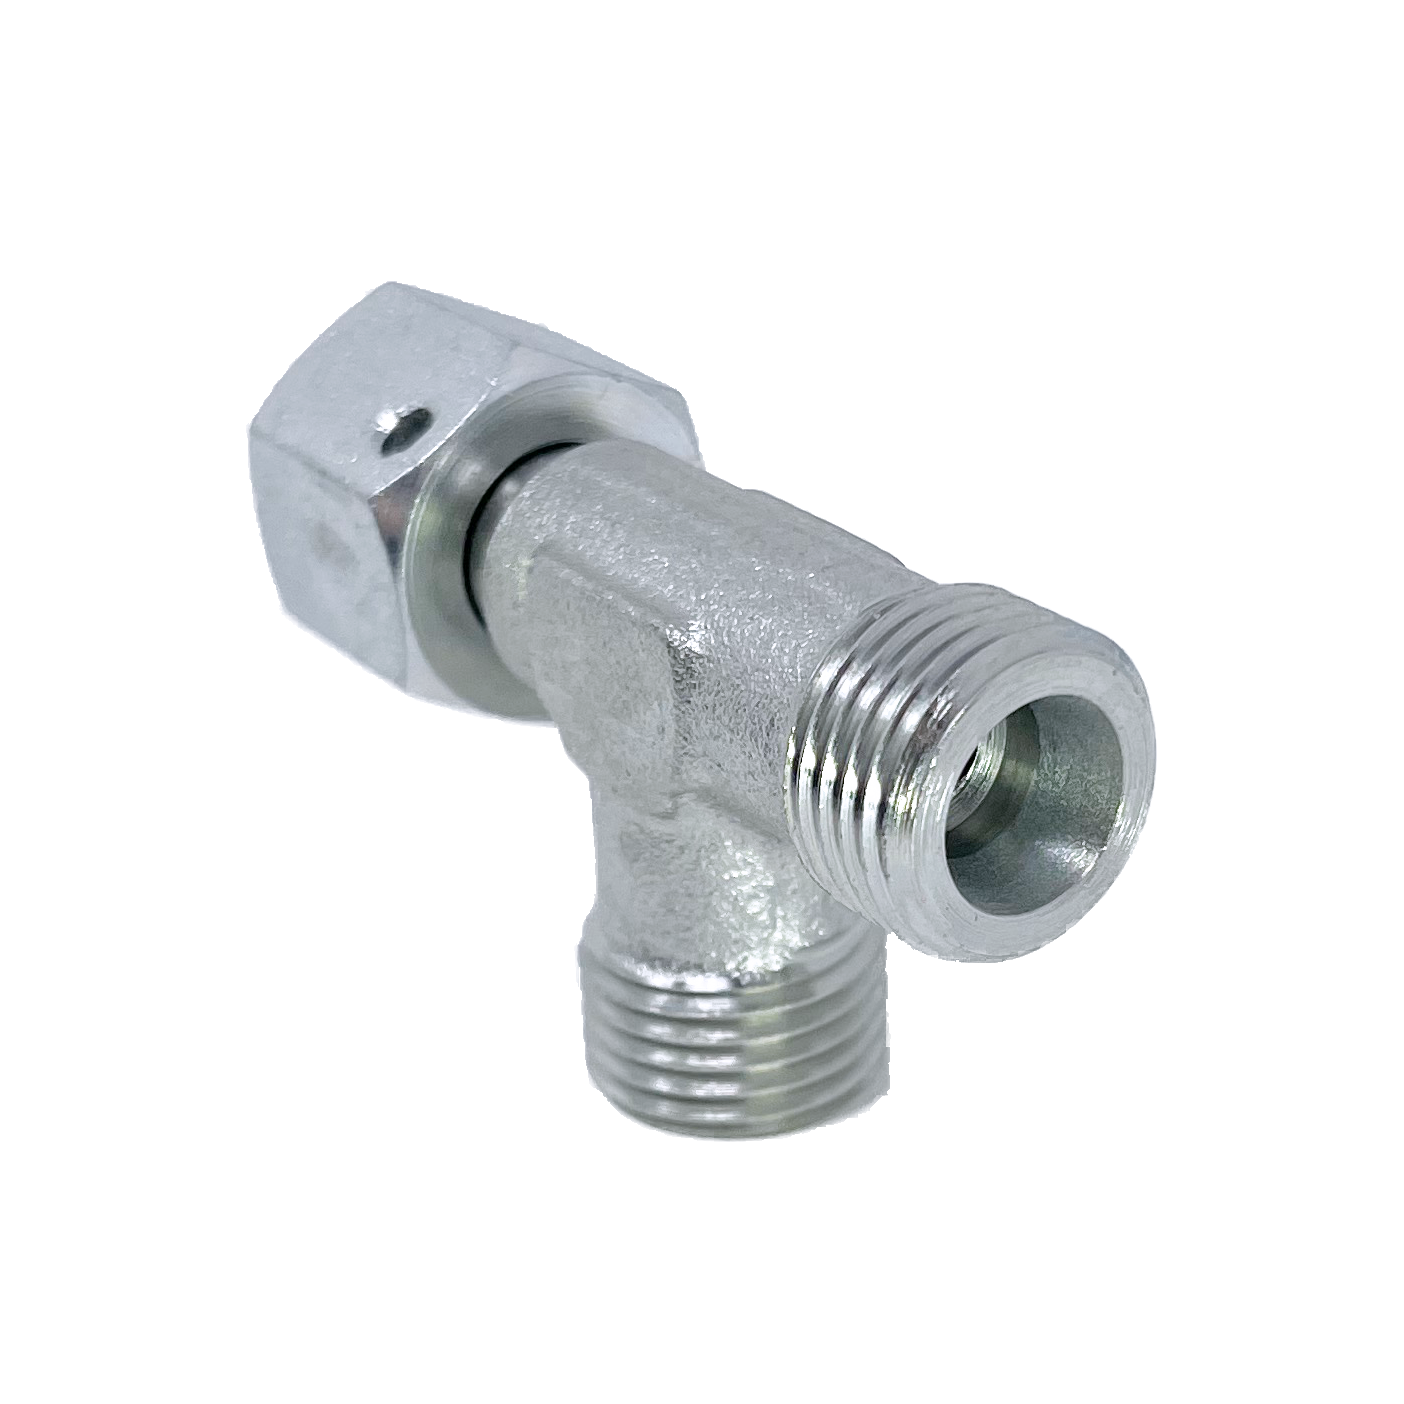 5390S-38 : Adaptall Tee Adapter, Male S38 DIN Tube x Male S38 DIN Tube x Female S38 DIN Tube, Carbon Steel, Heavy Duty